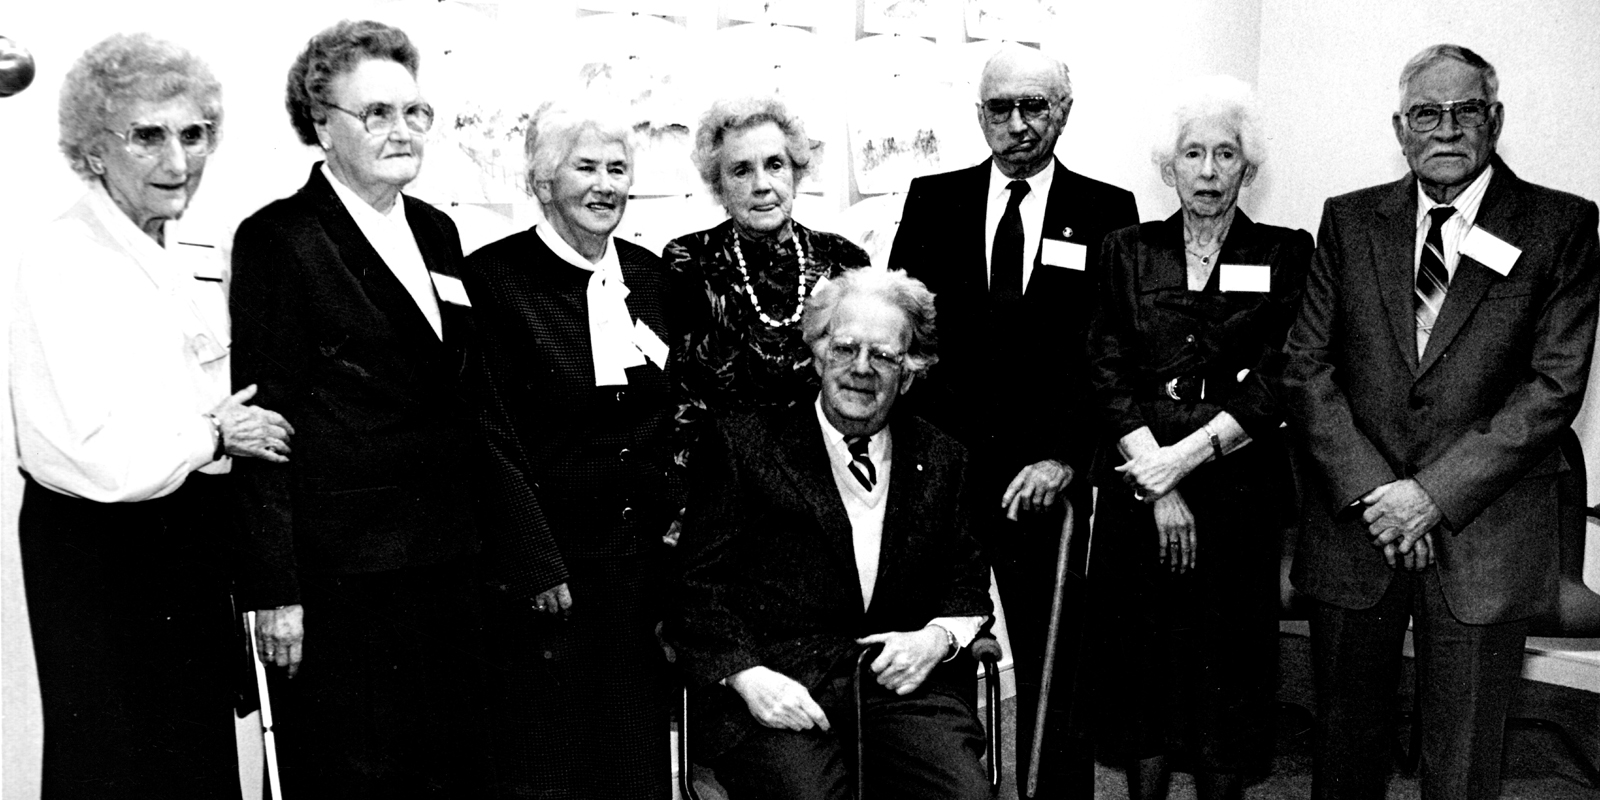 Aurore Bourque, first from the left, with members of Aberdeen High School’s Class of 1928, including Northrup Frye, seated, during a 1990 reunion.